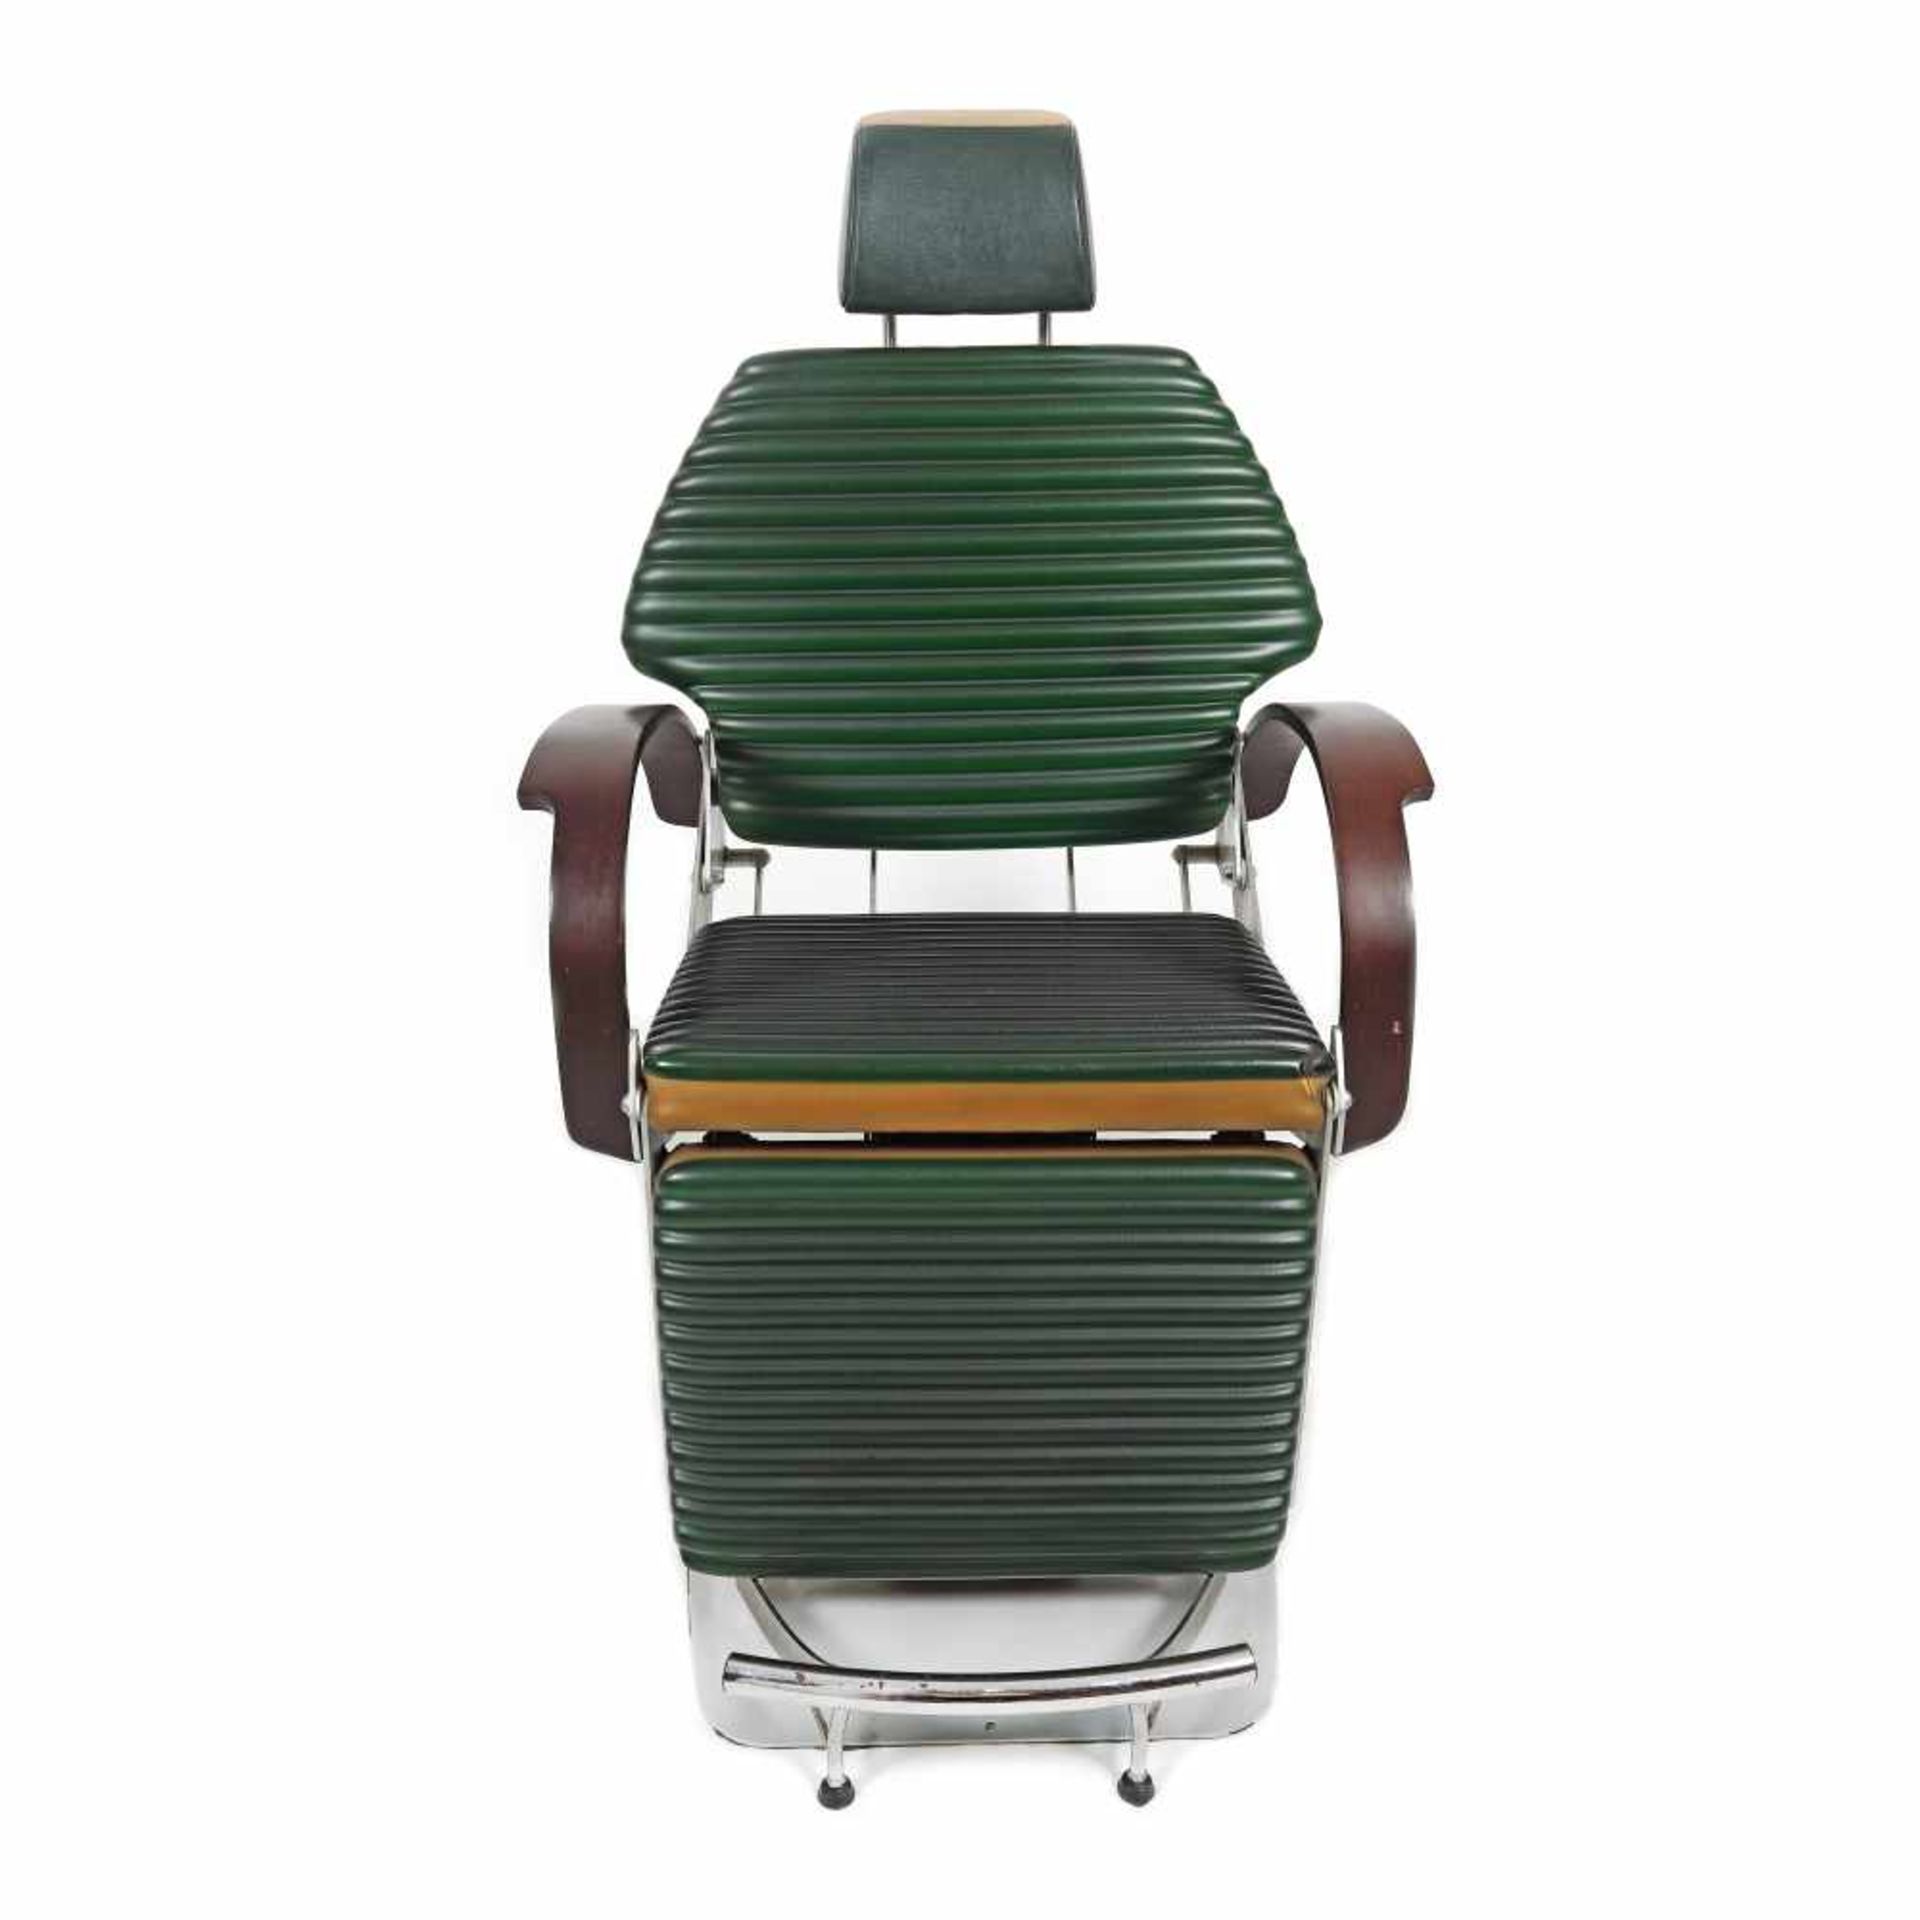 Barber chair, United States of America, approx. 1960-1970 - Image 2 of 2